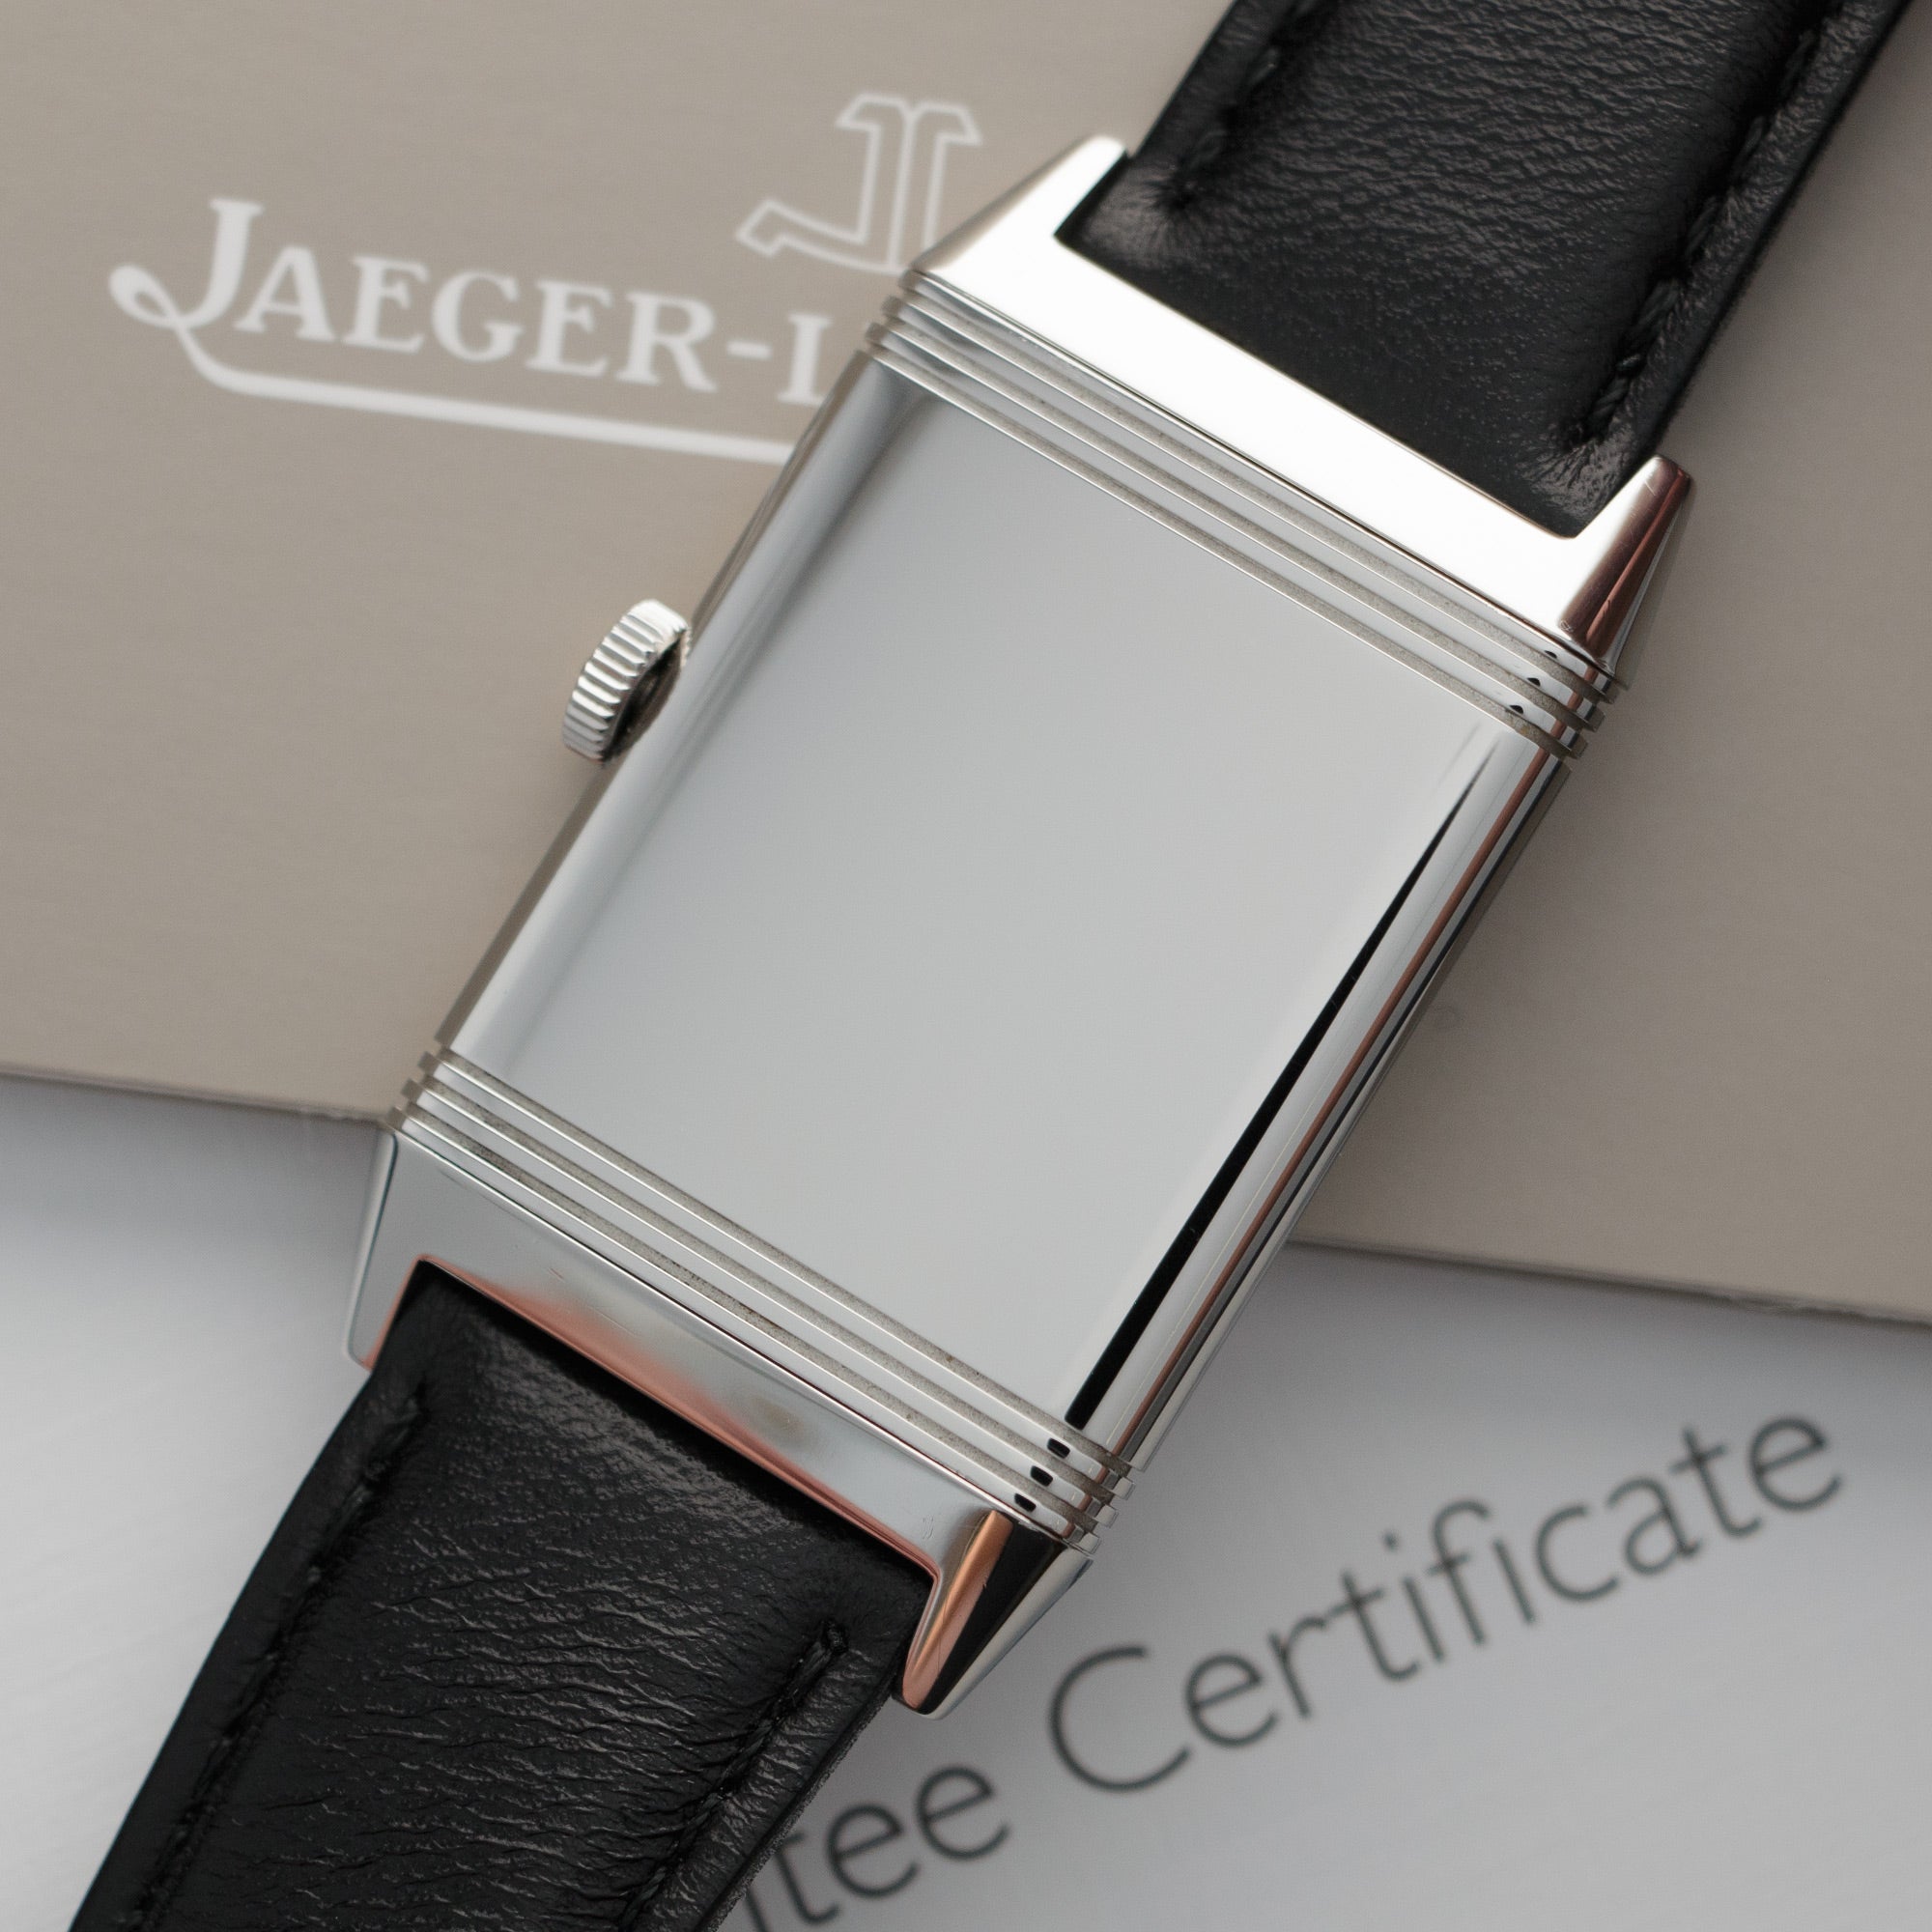 Jaeger LeCoultre - Jaeger LeCoultre Grande Reverso Ultra-Thin Tribute to 1931 Watch, with Original Box and Papers - The Keystone Watches